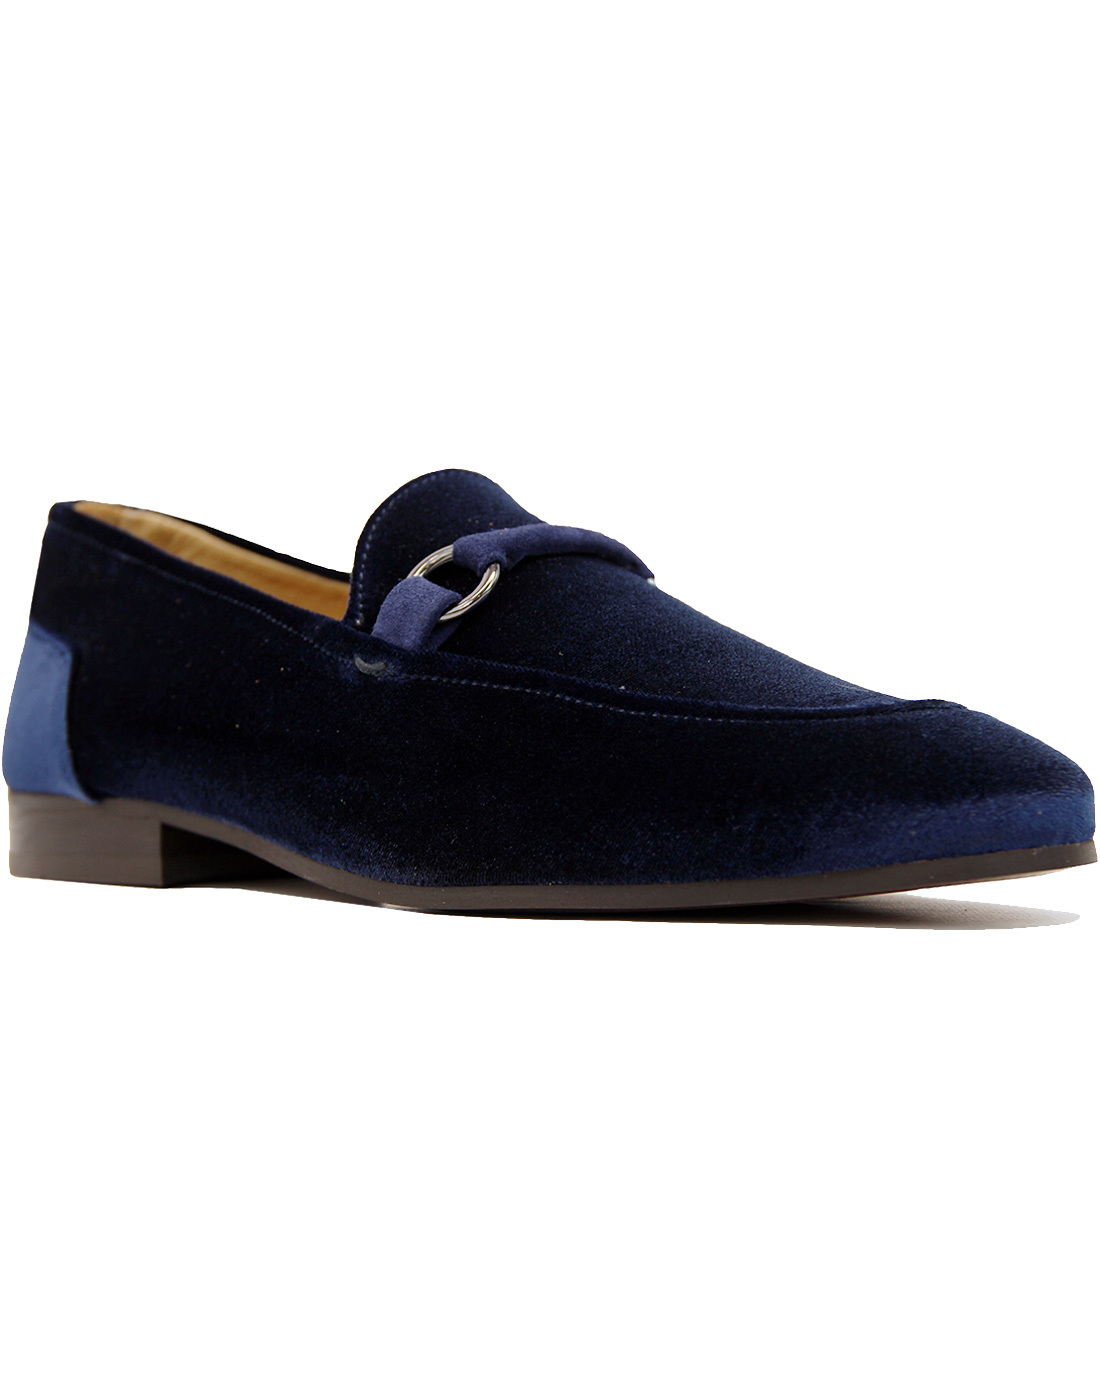 H By HUDSON Renzo Handcrafted Velvet Loafers in Navy